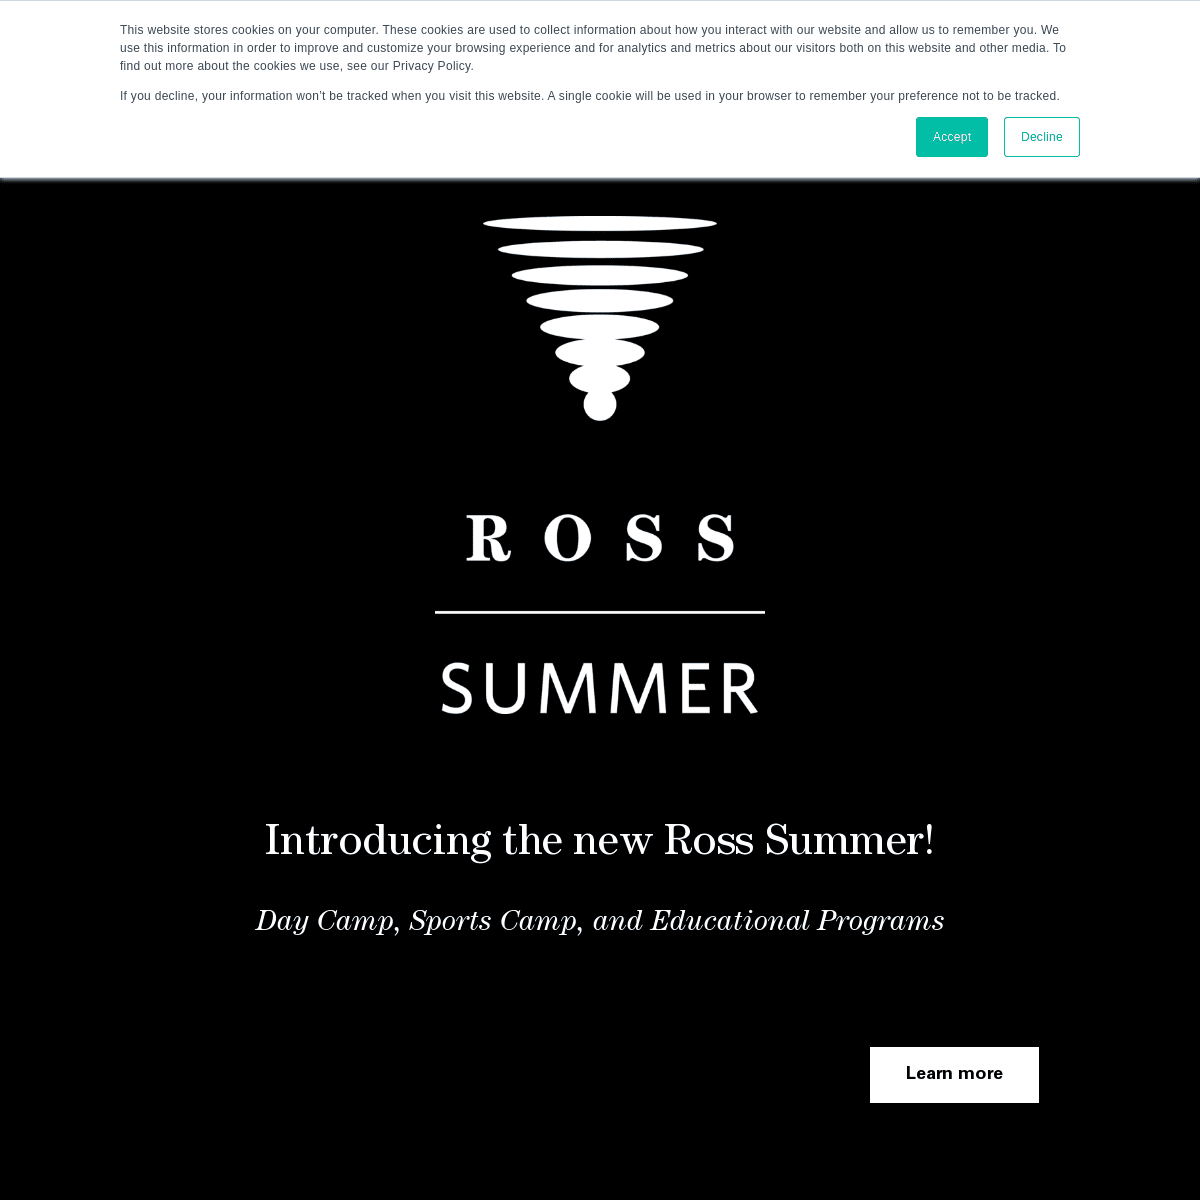 A complete backup of https://ross.org